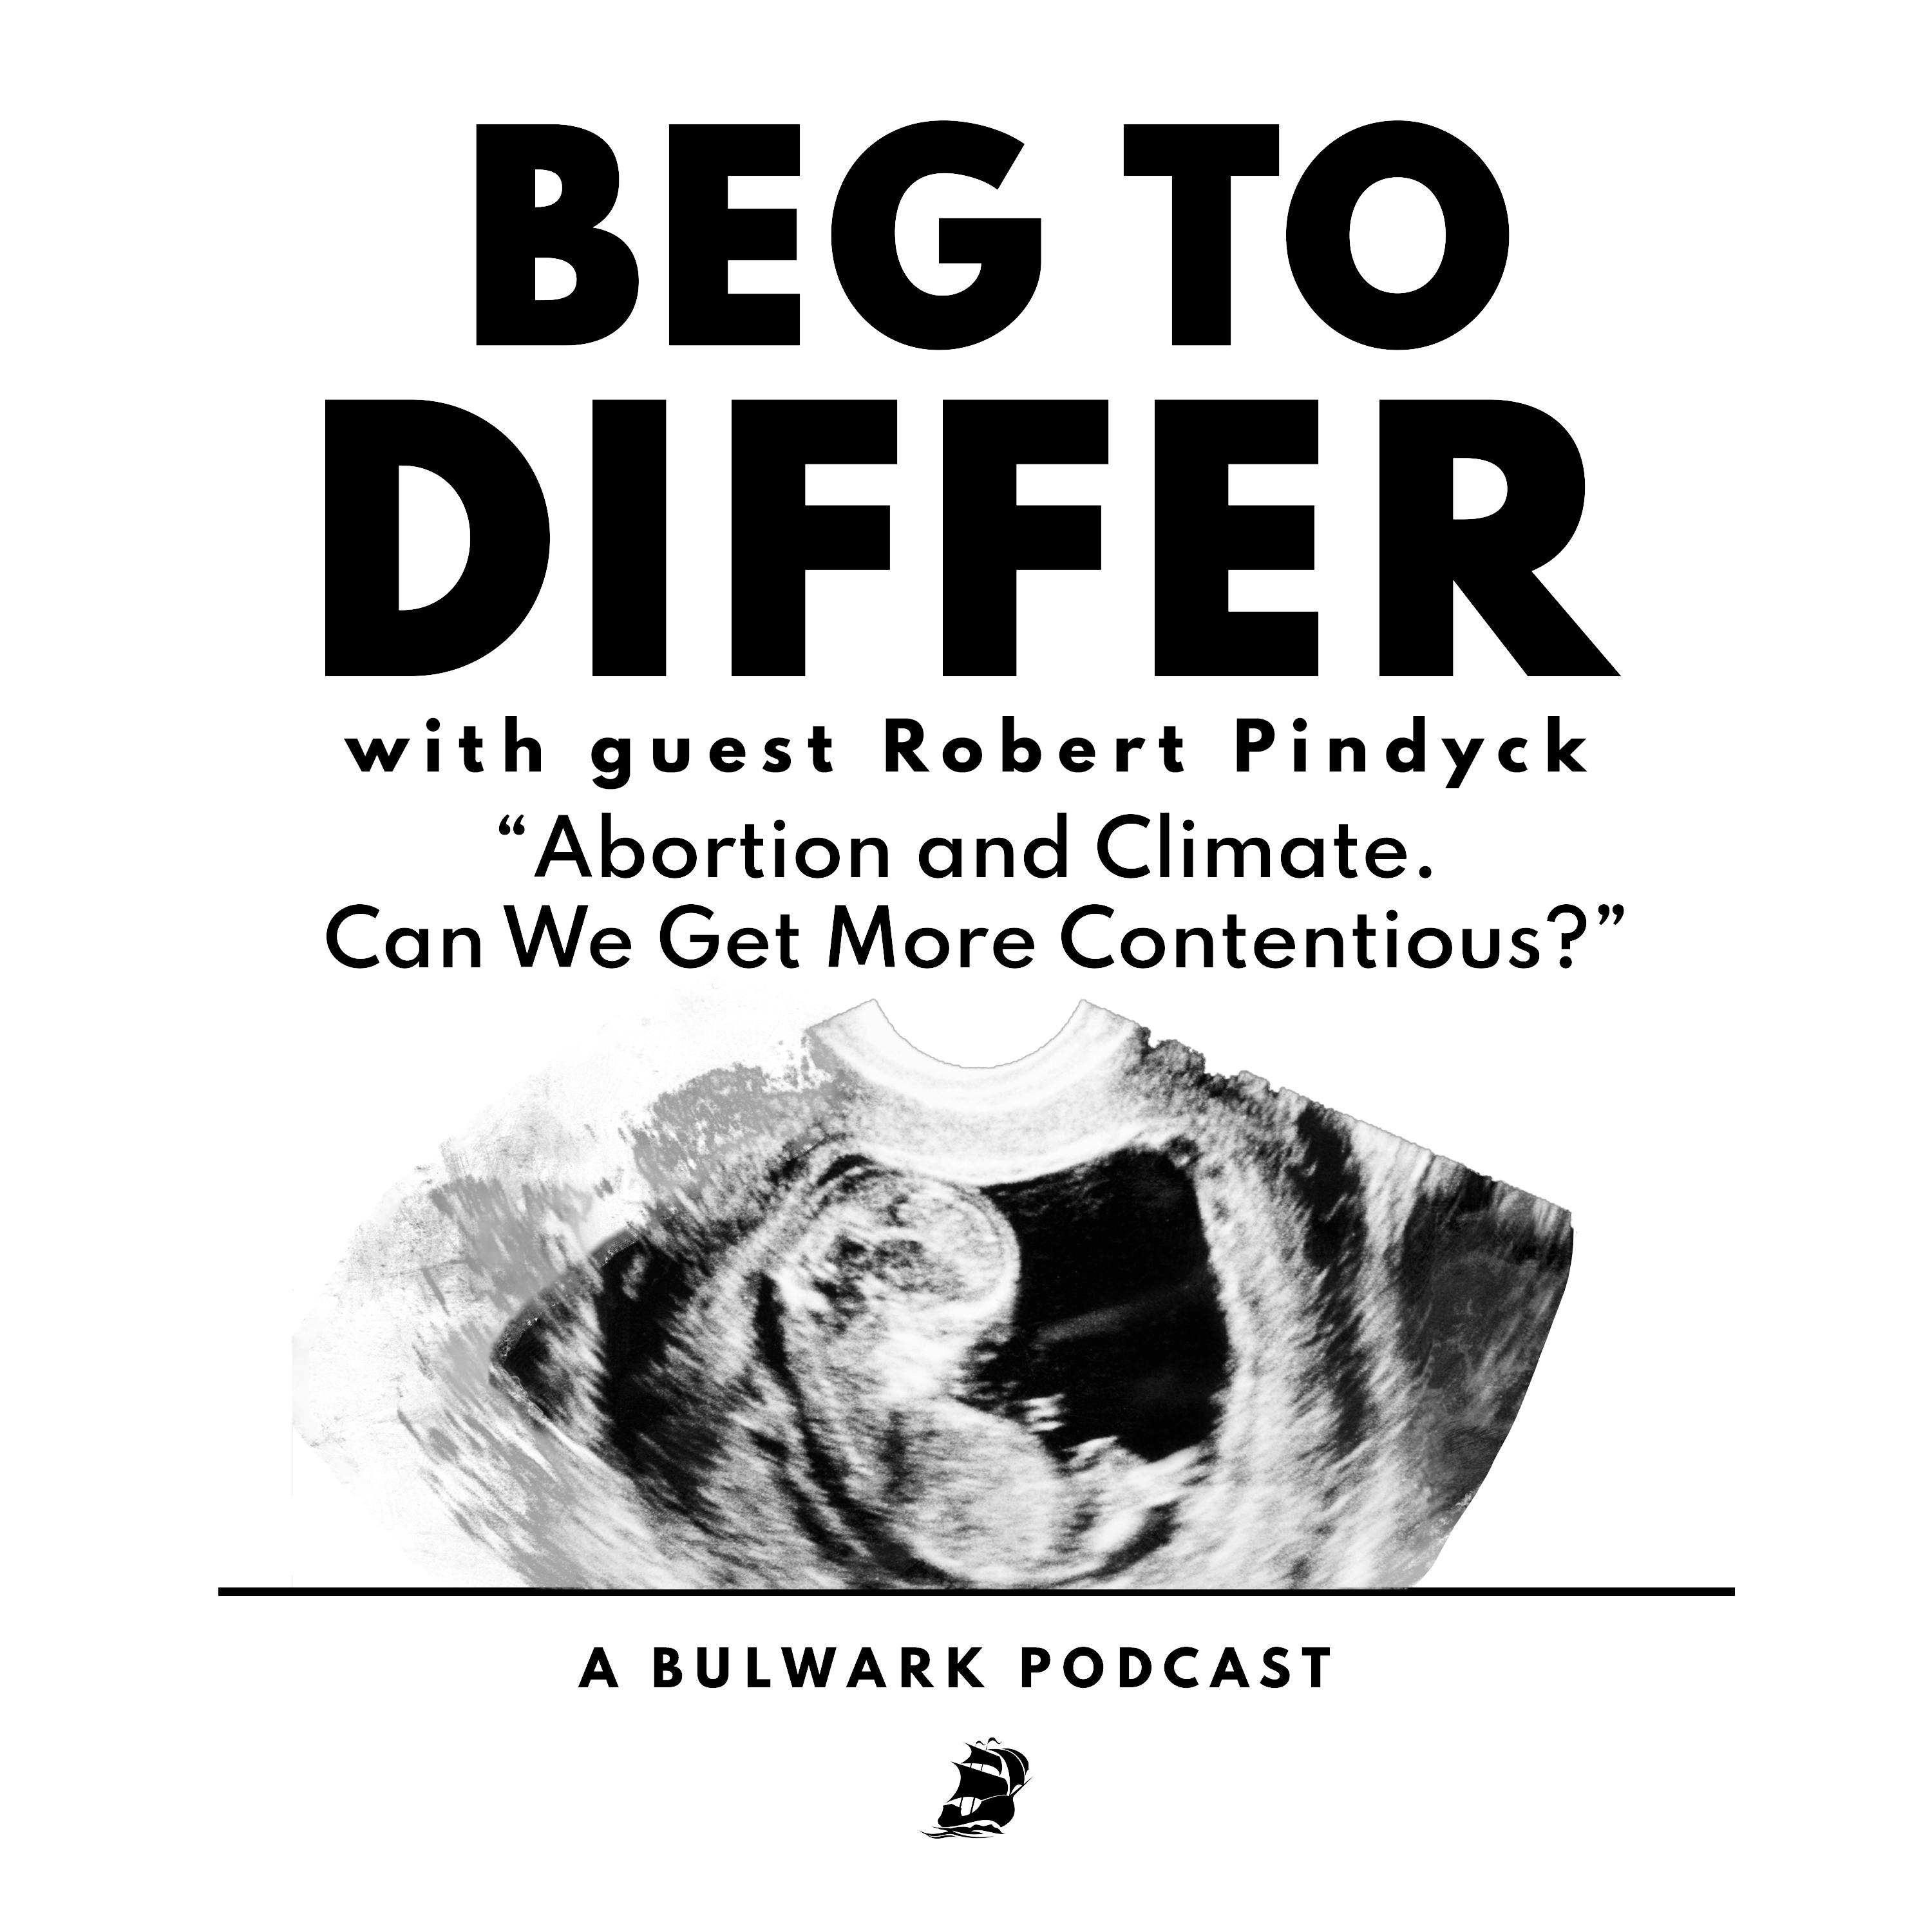 Abortion and Climate. Can We Get More Contentious? (with Robert Pindyck)